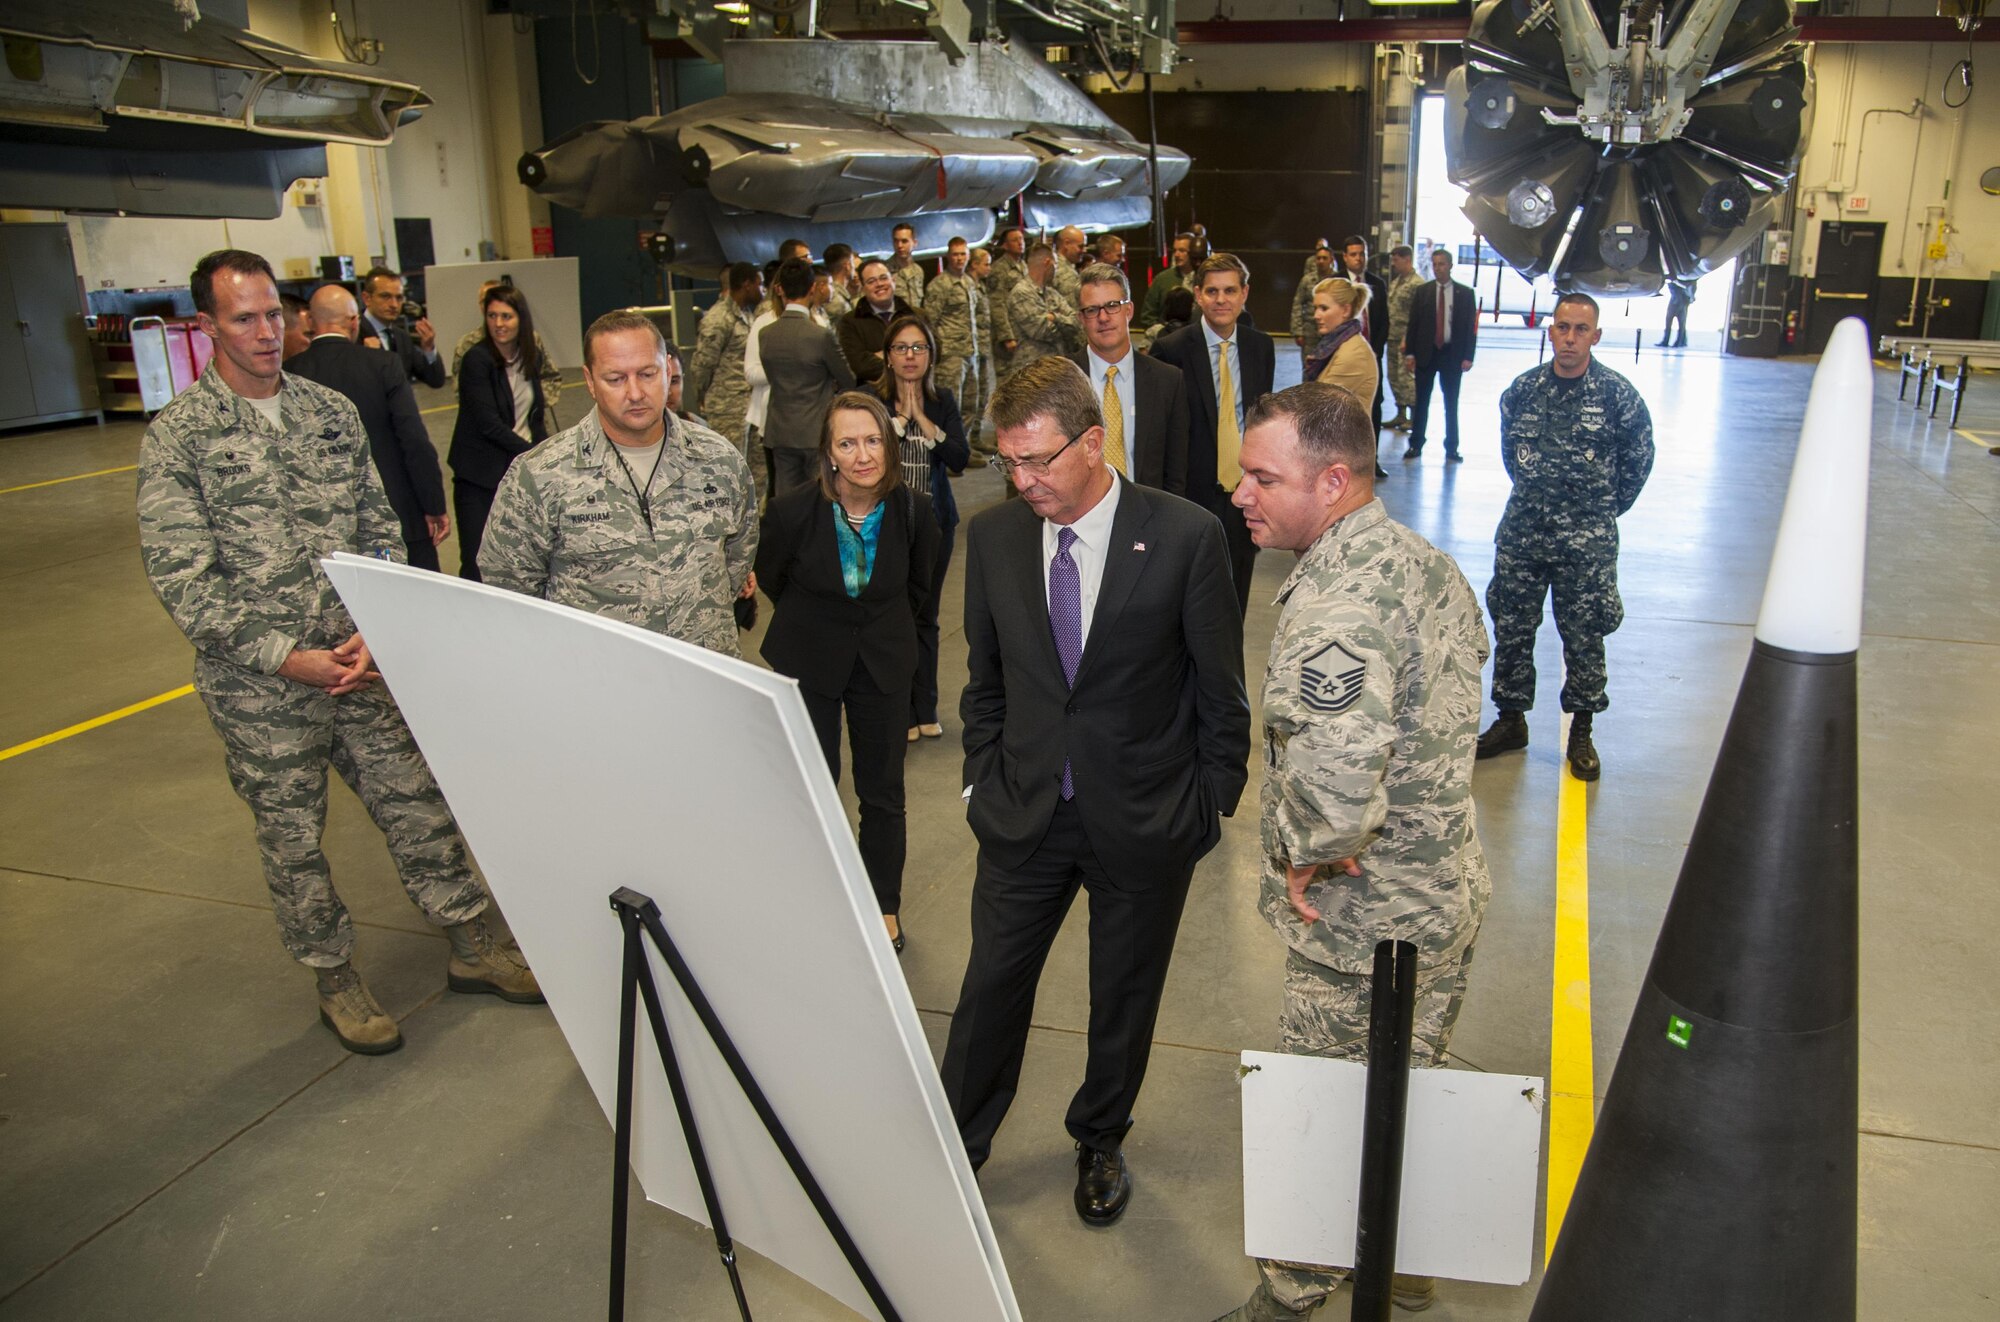 U.S. Secretary of Defense Ashton Carter receives a tour of the weapons storage area at Minot Air Force Base, N.D., Sept. 26, 2016. Carter spoke with Airmen from the 5th BW and 91st MW and toured several facilities to include a missile alert facility and a B-52H Stratofortress static display. Airmen at Minot AFB play a critical role in maintaining and ensuring some of the Nation’s most powerful weapons remain safe, secure and effective. (U.S. Air Force photo/Airman 1st Class Christian Sullivan)